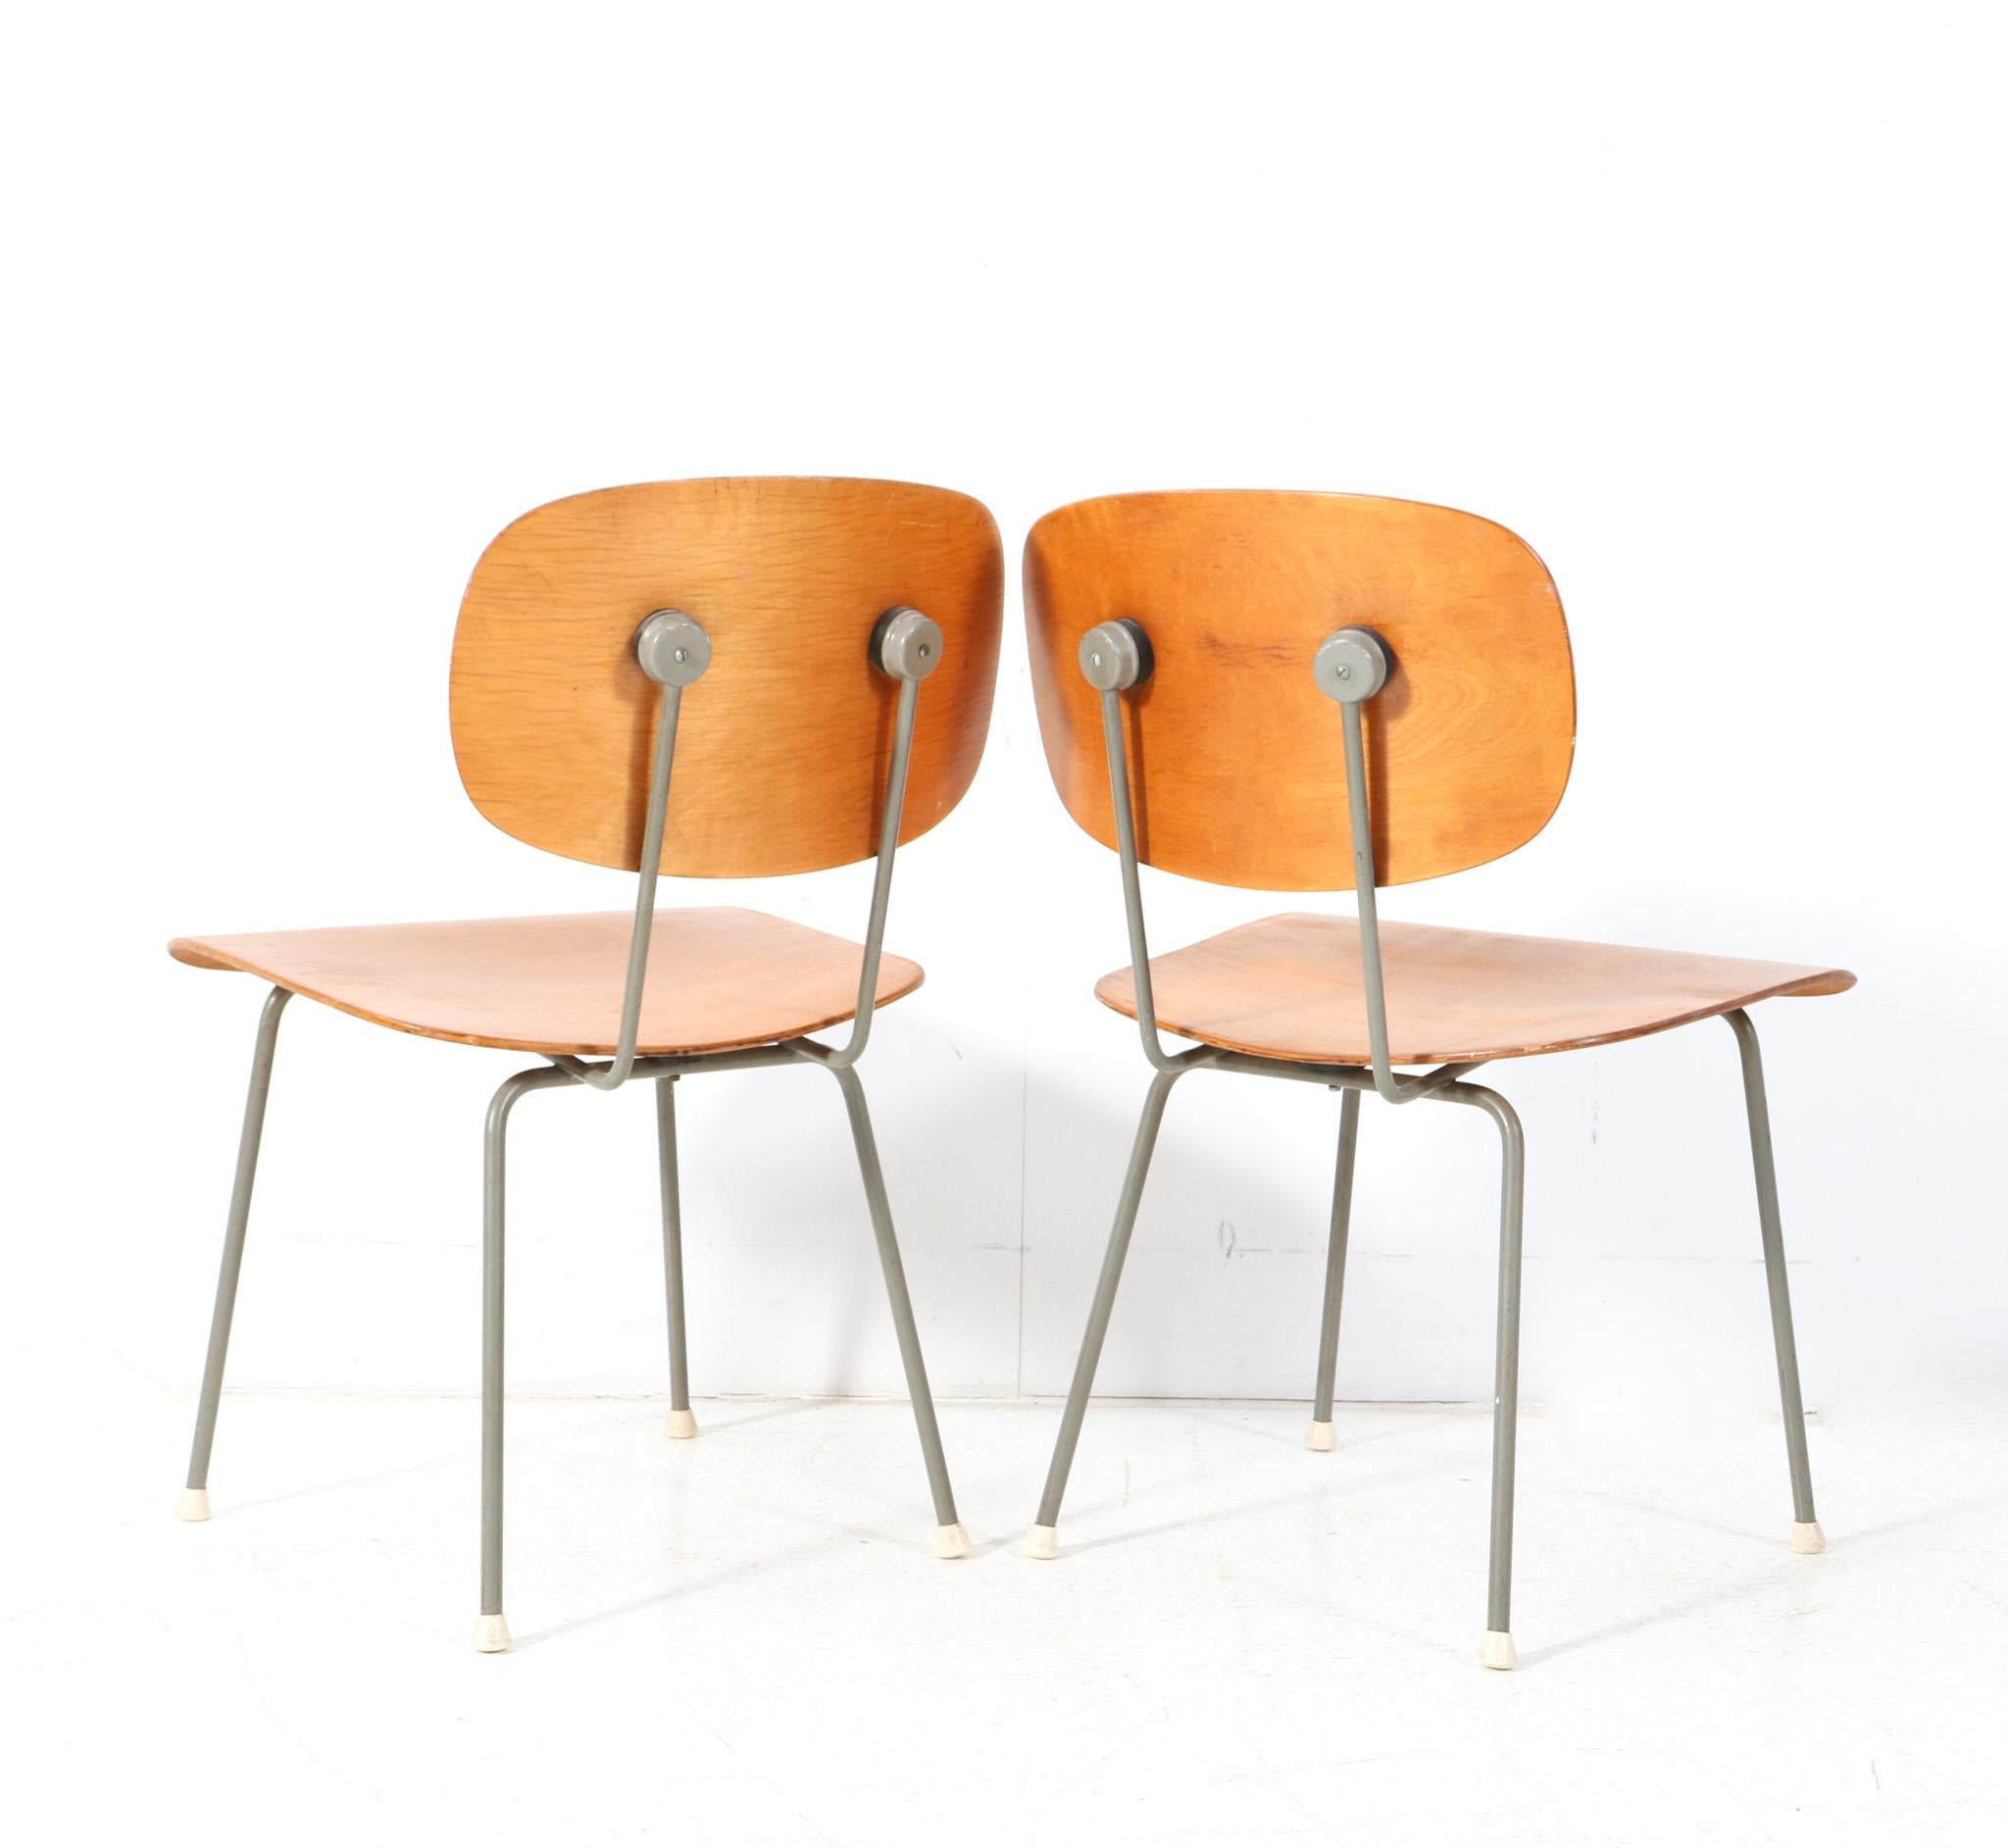 Pair of Mid-Century Modern Model 116 Side Chairs by Wim Rietveld for Gispen In Good Condition For Sale In Amsterdam, NL